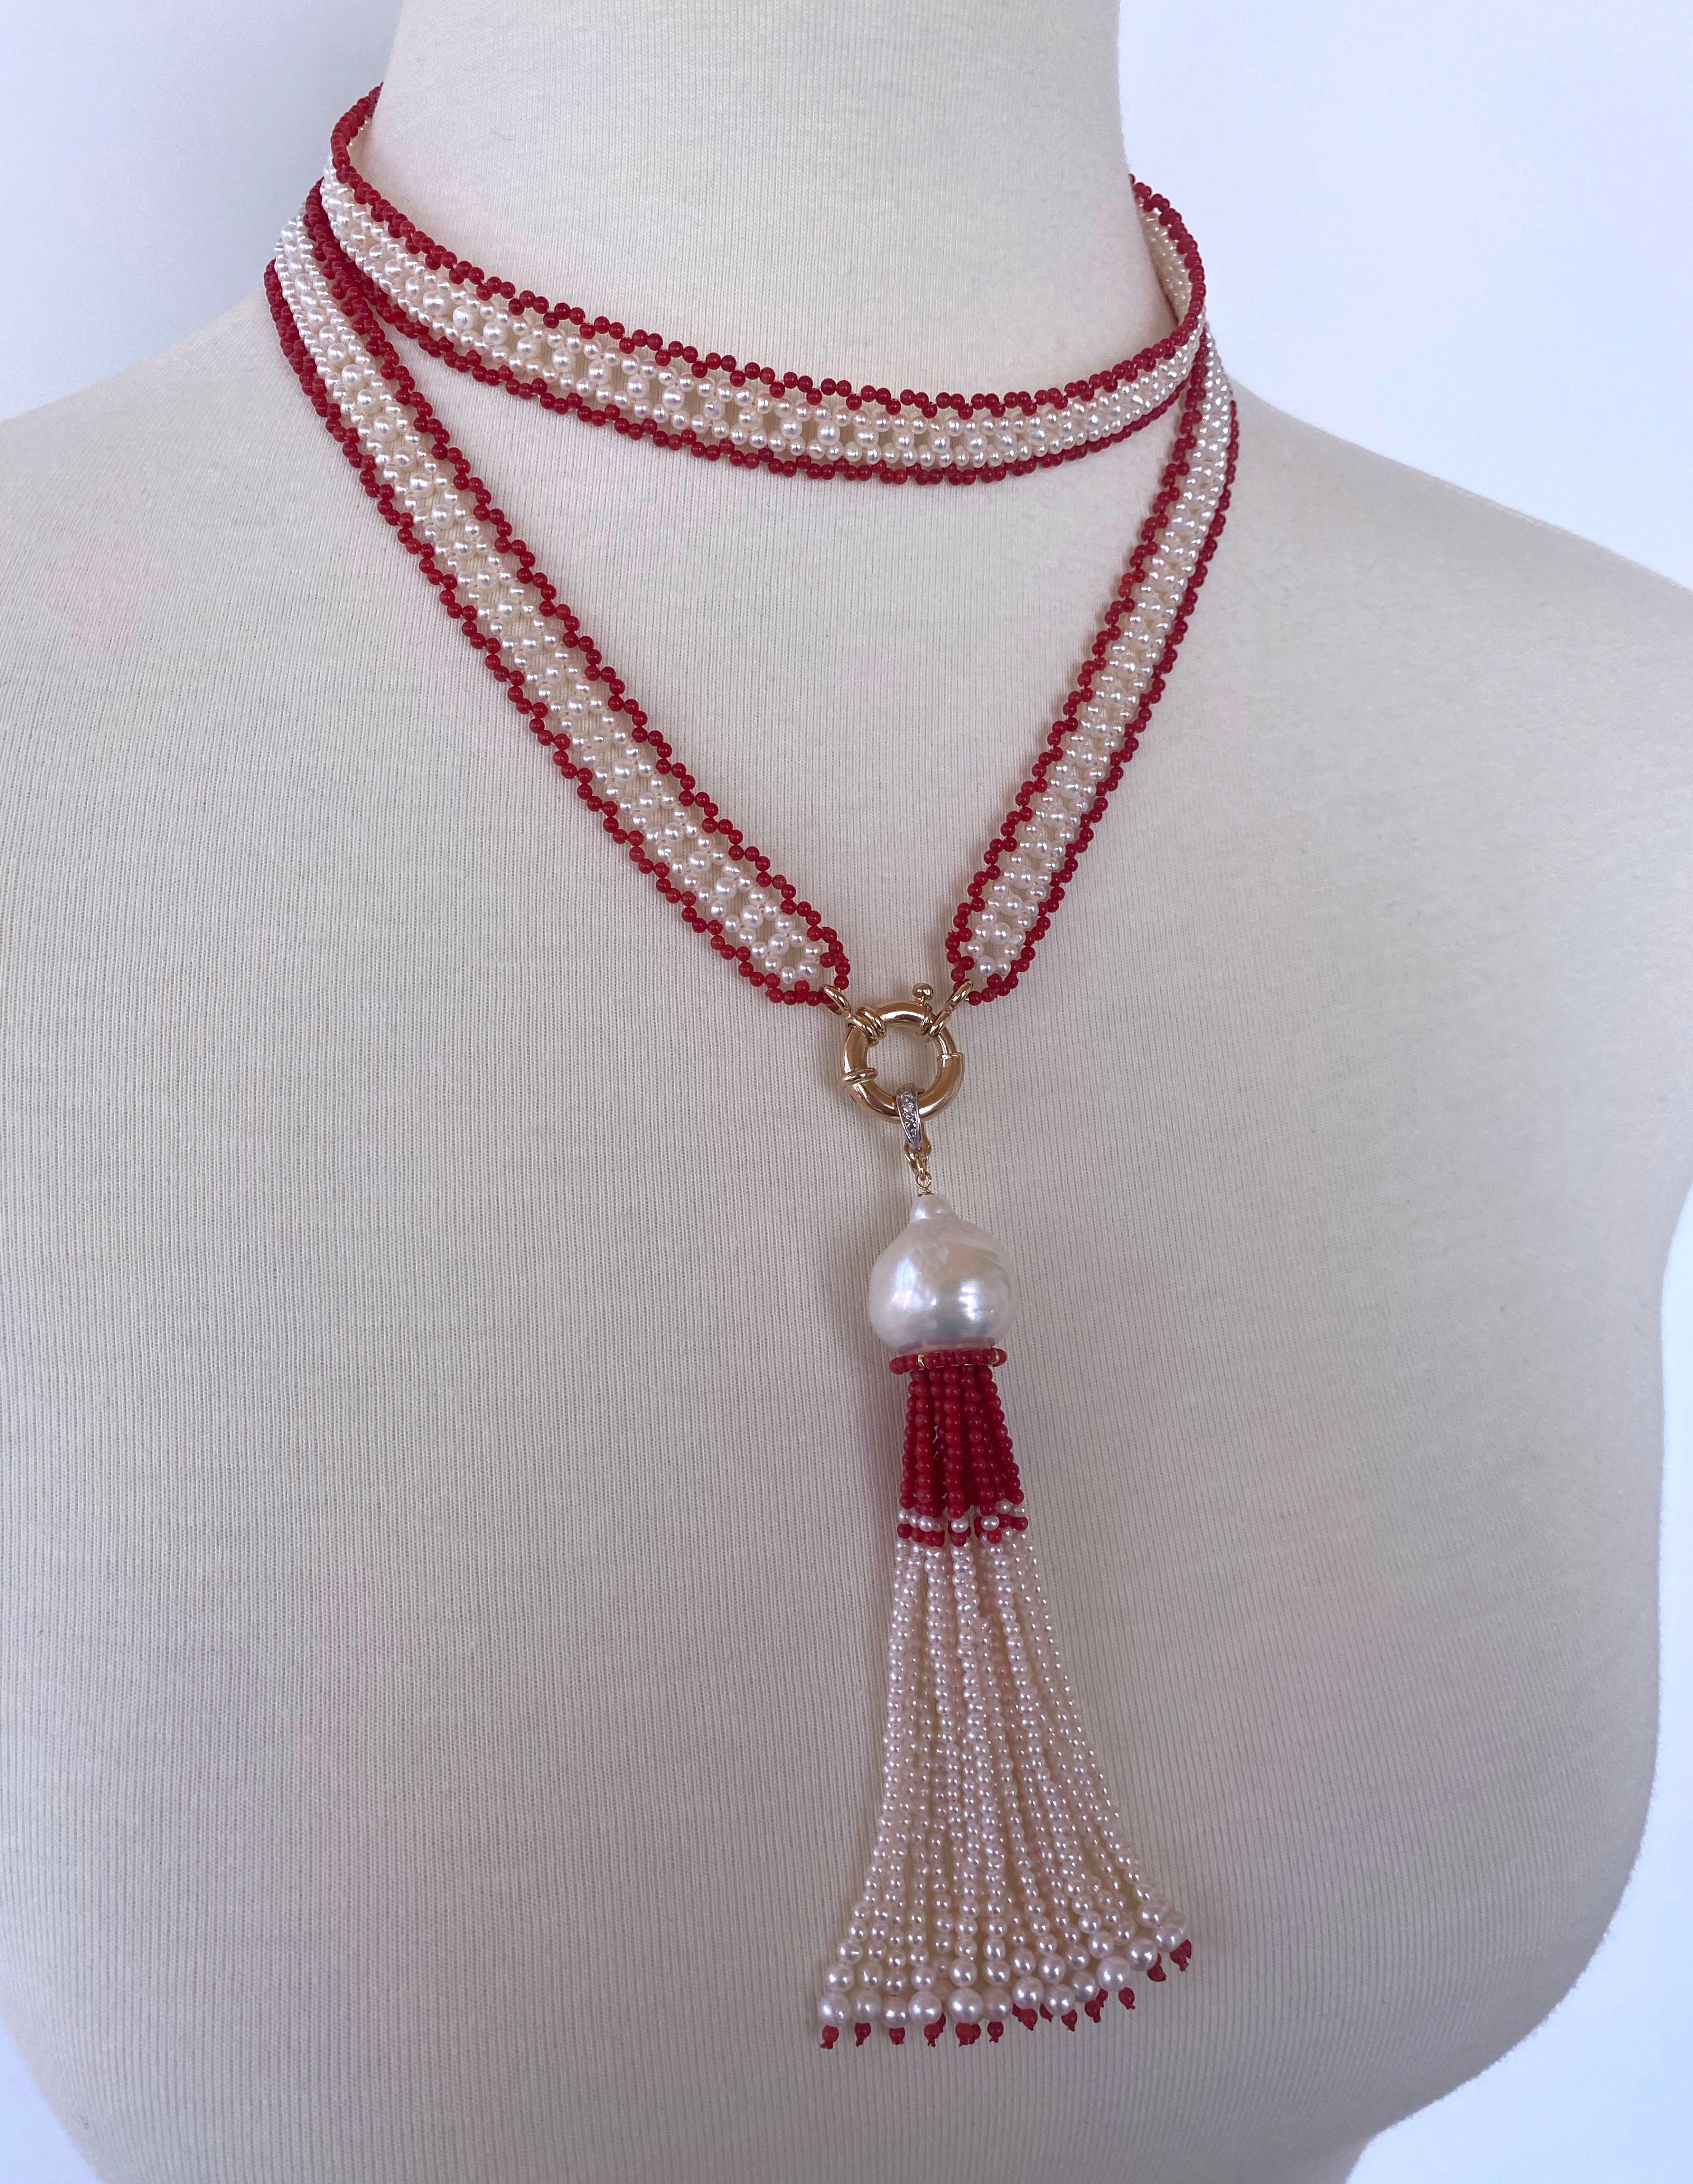 Marina J. Fine Woven Coral & Pearl Satuoir with Baroque Tassel & 14k Yellow Gold For Sale 2